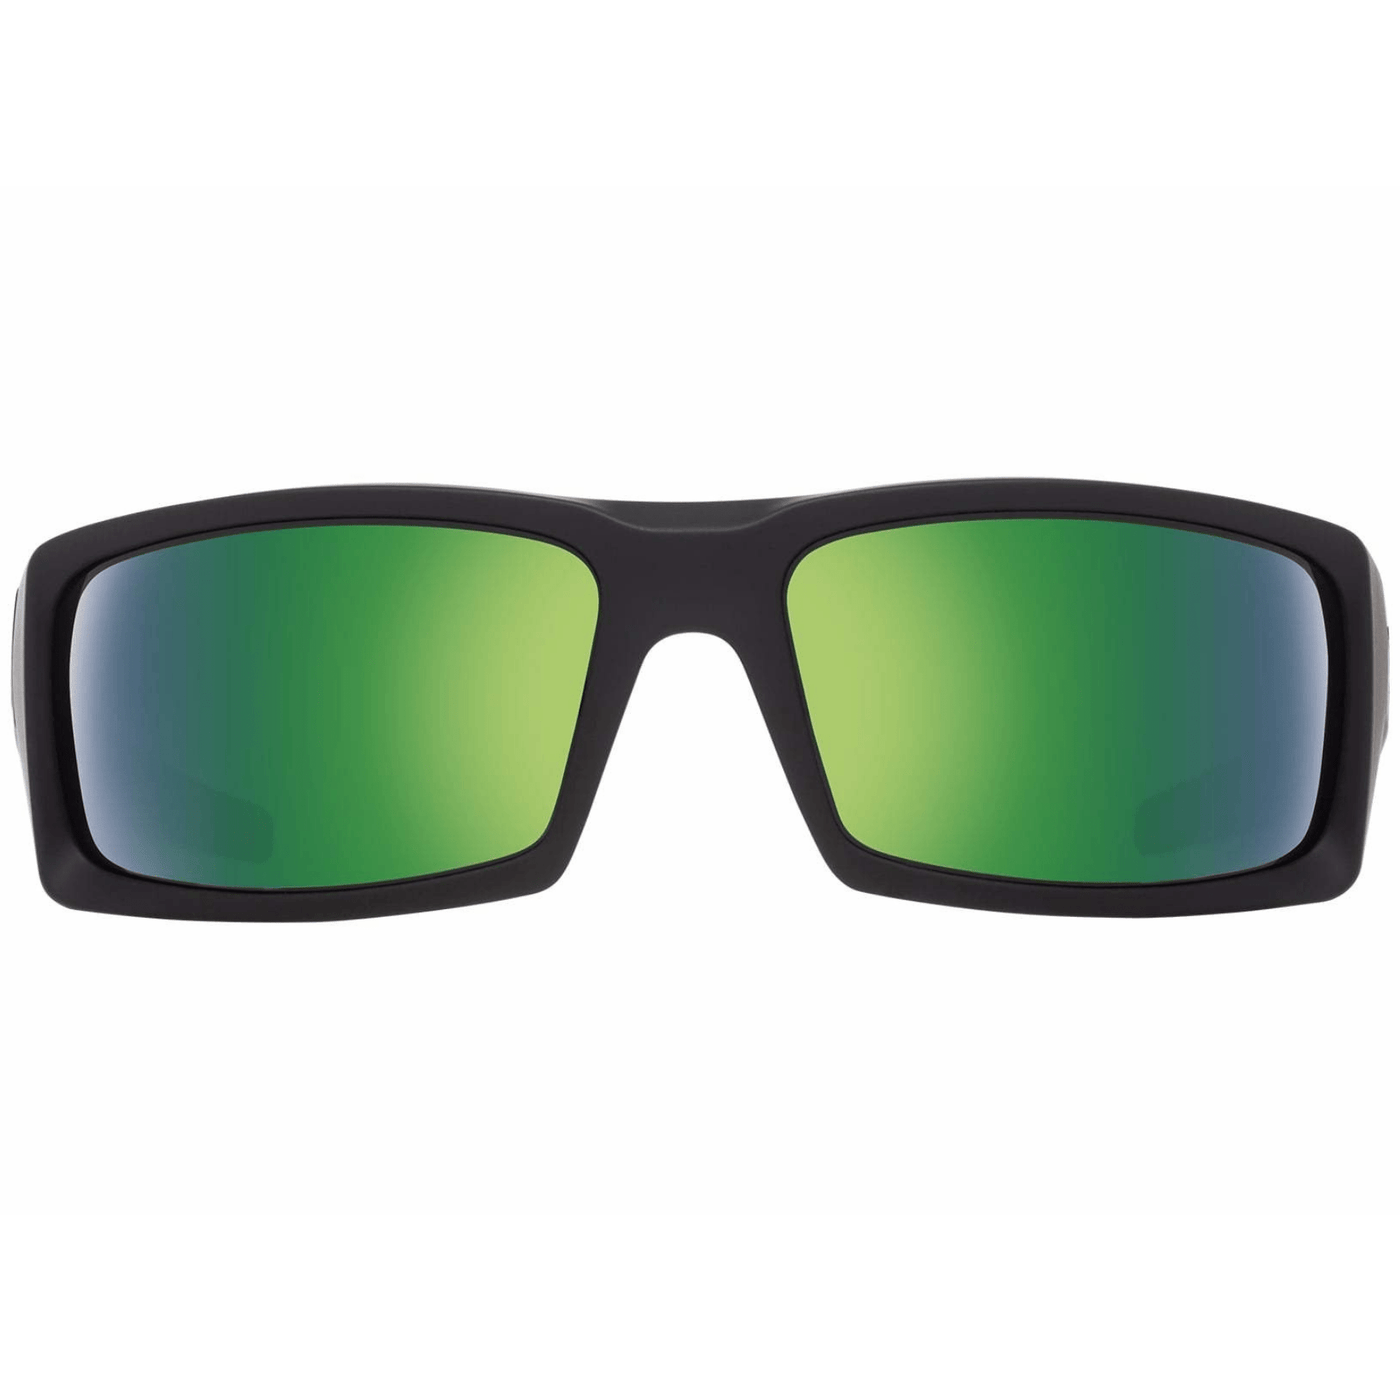 SPY GENERAL Polarized Sunglasses, Happy Lens - Green 8Lines Shop - Fast Shipping